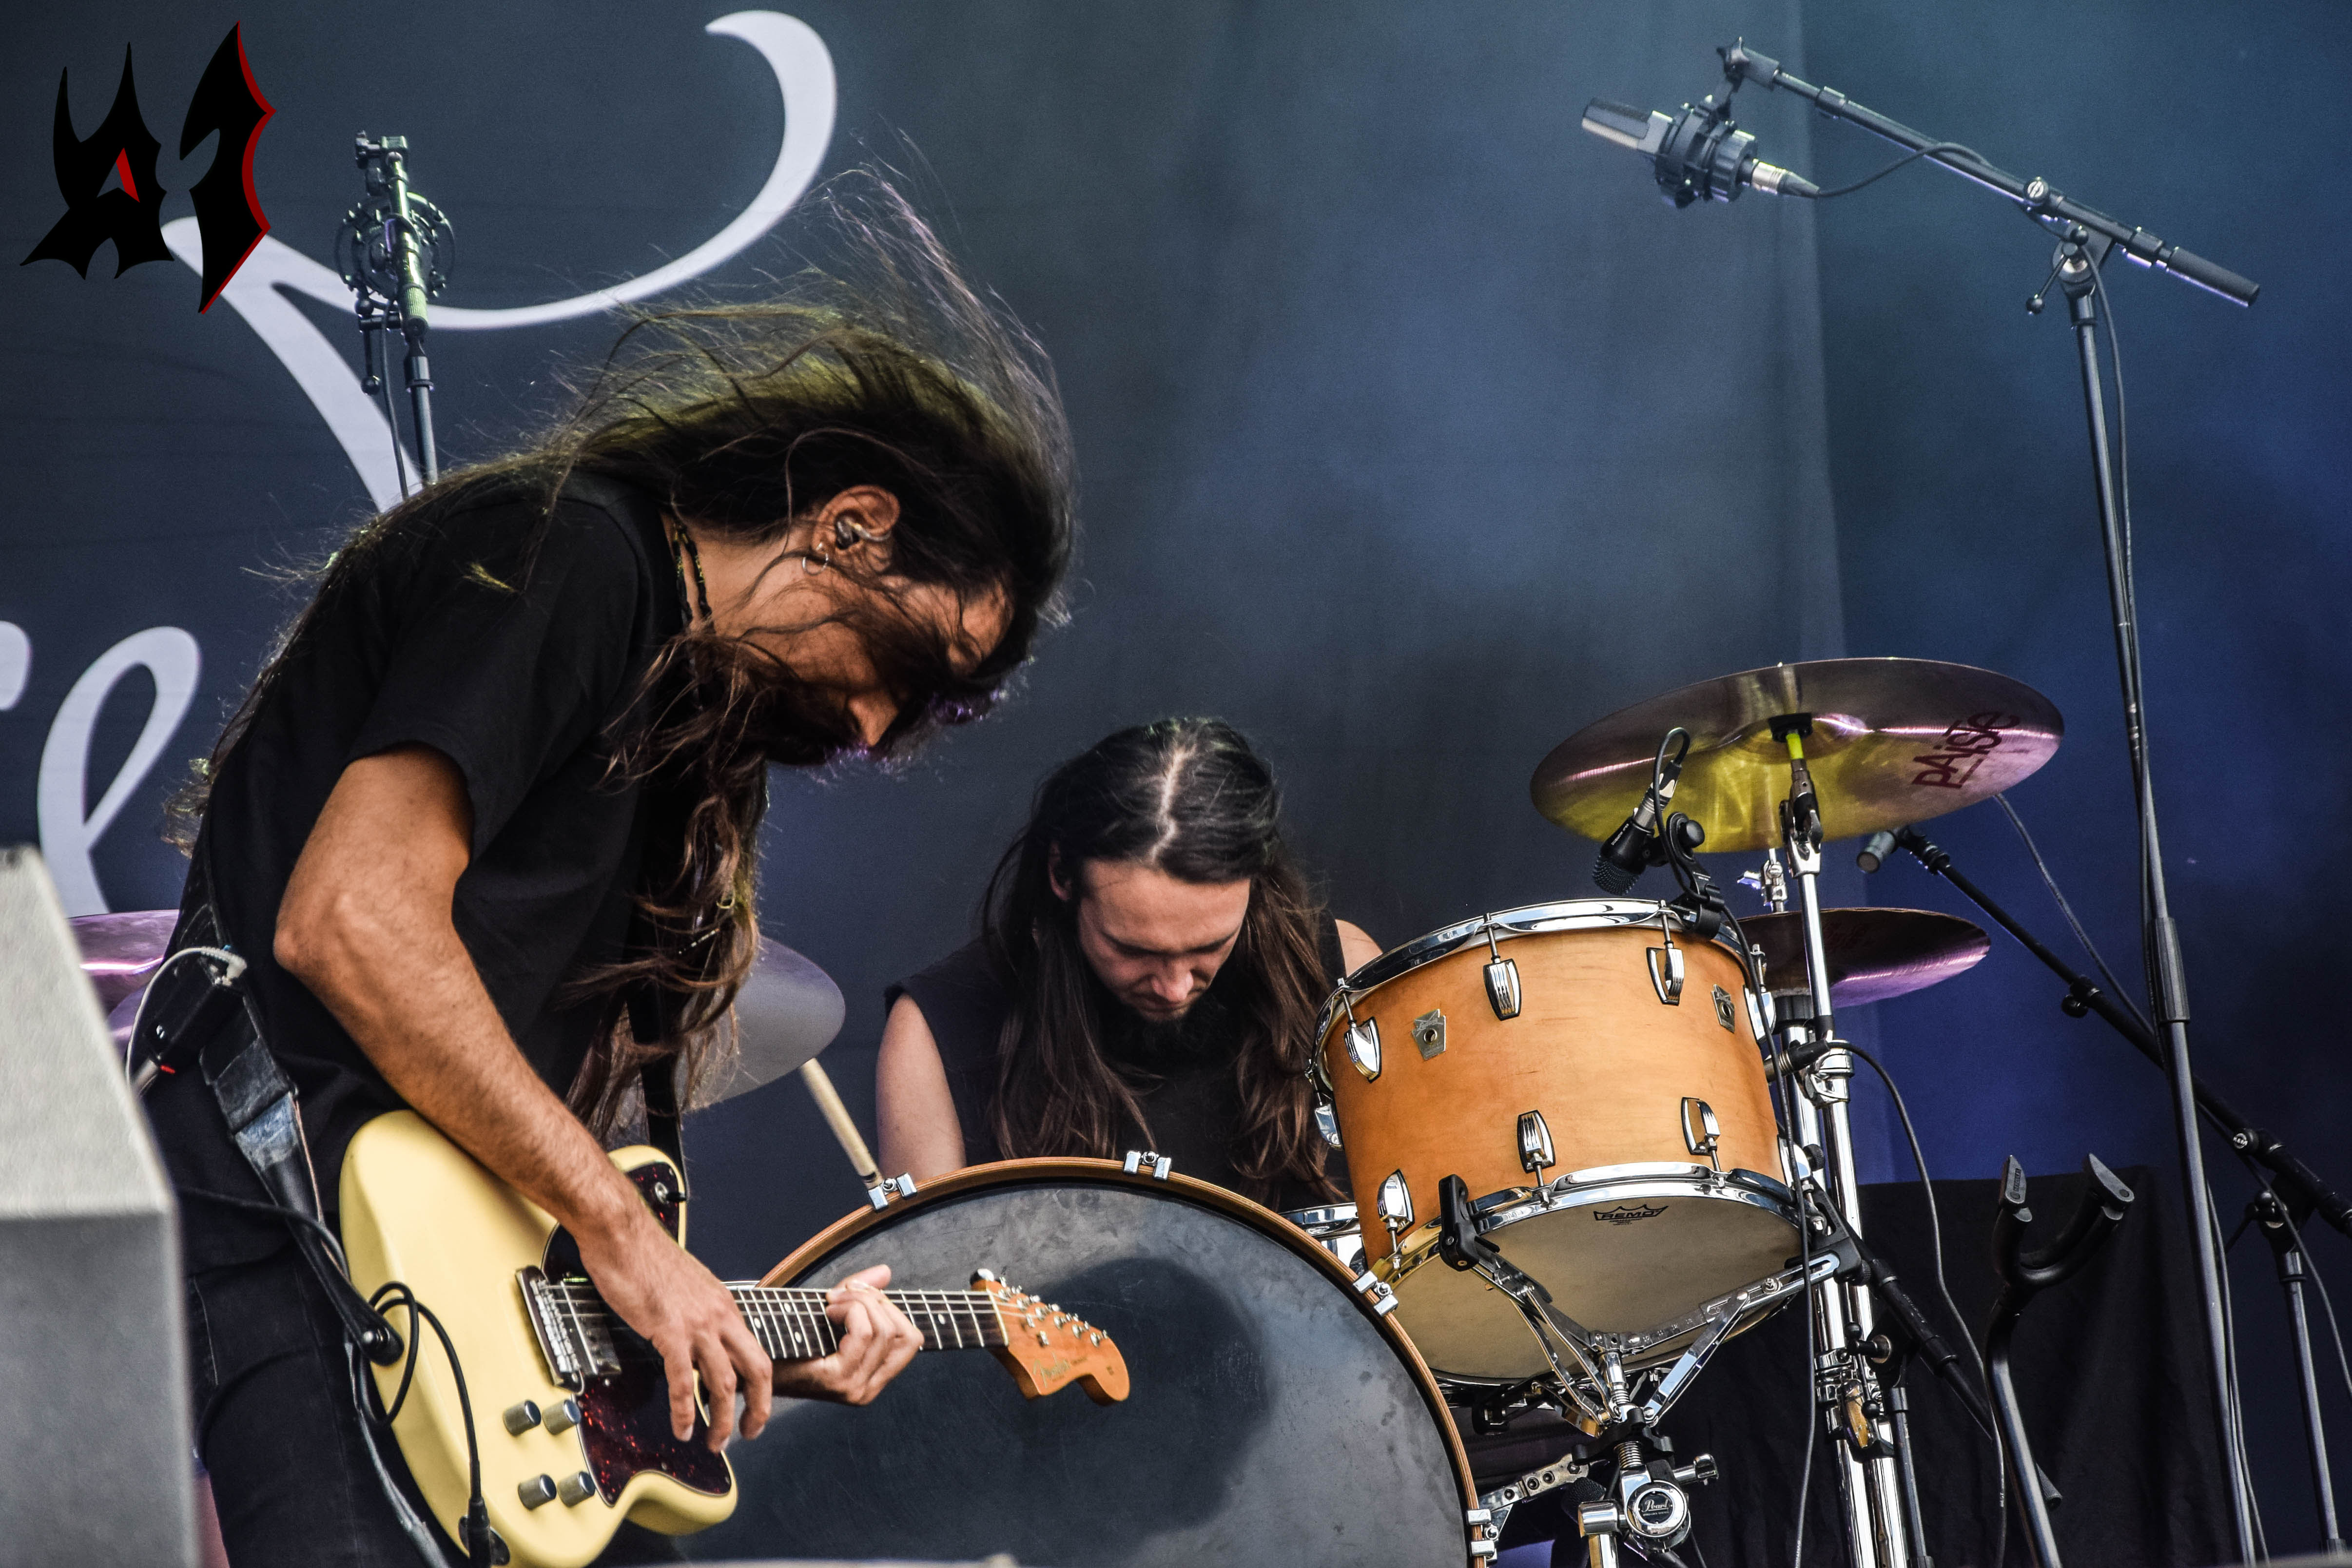 Donwload 2018 – Day 2 - Alcest 17